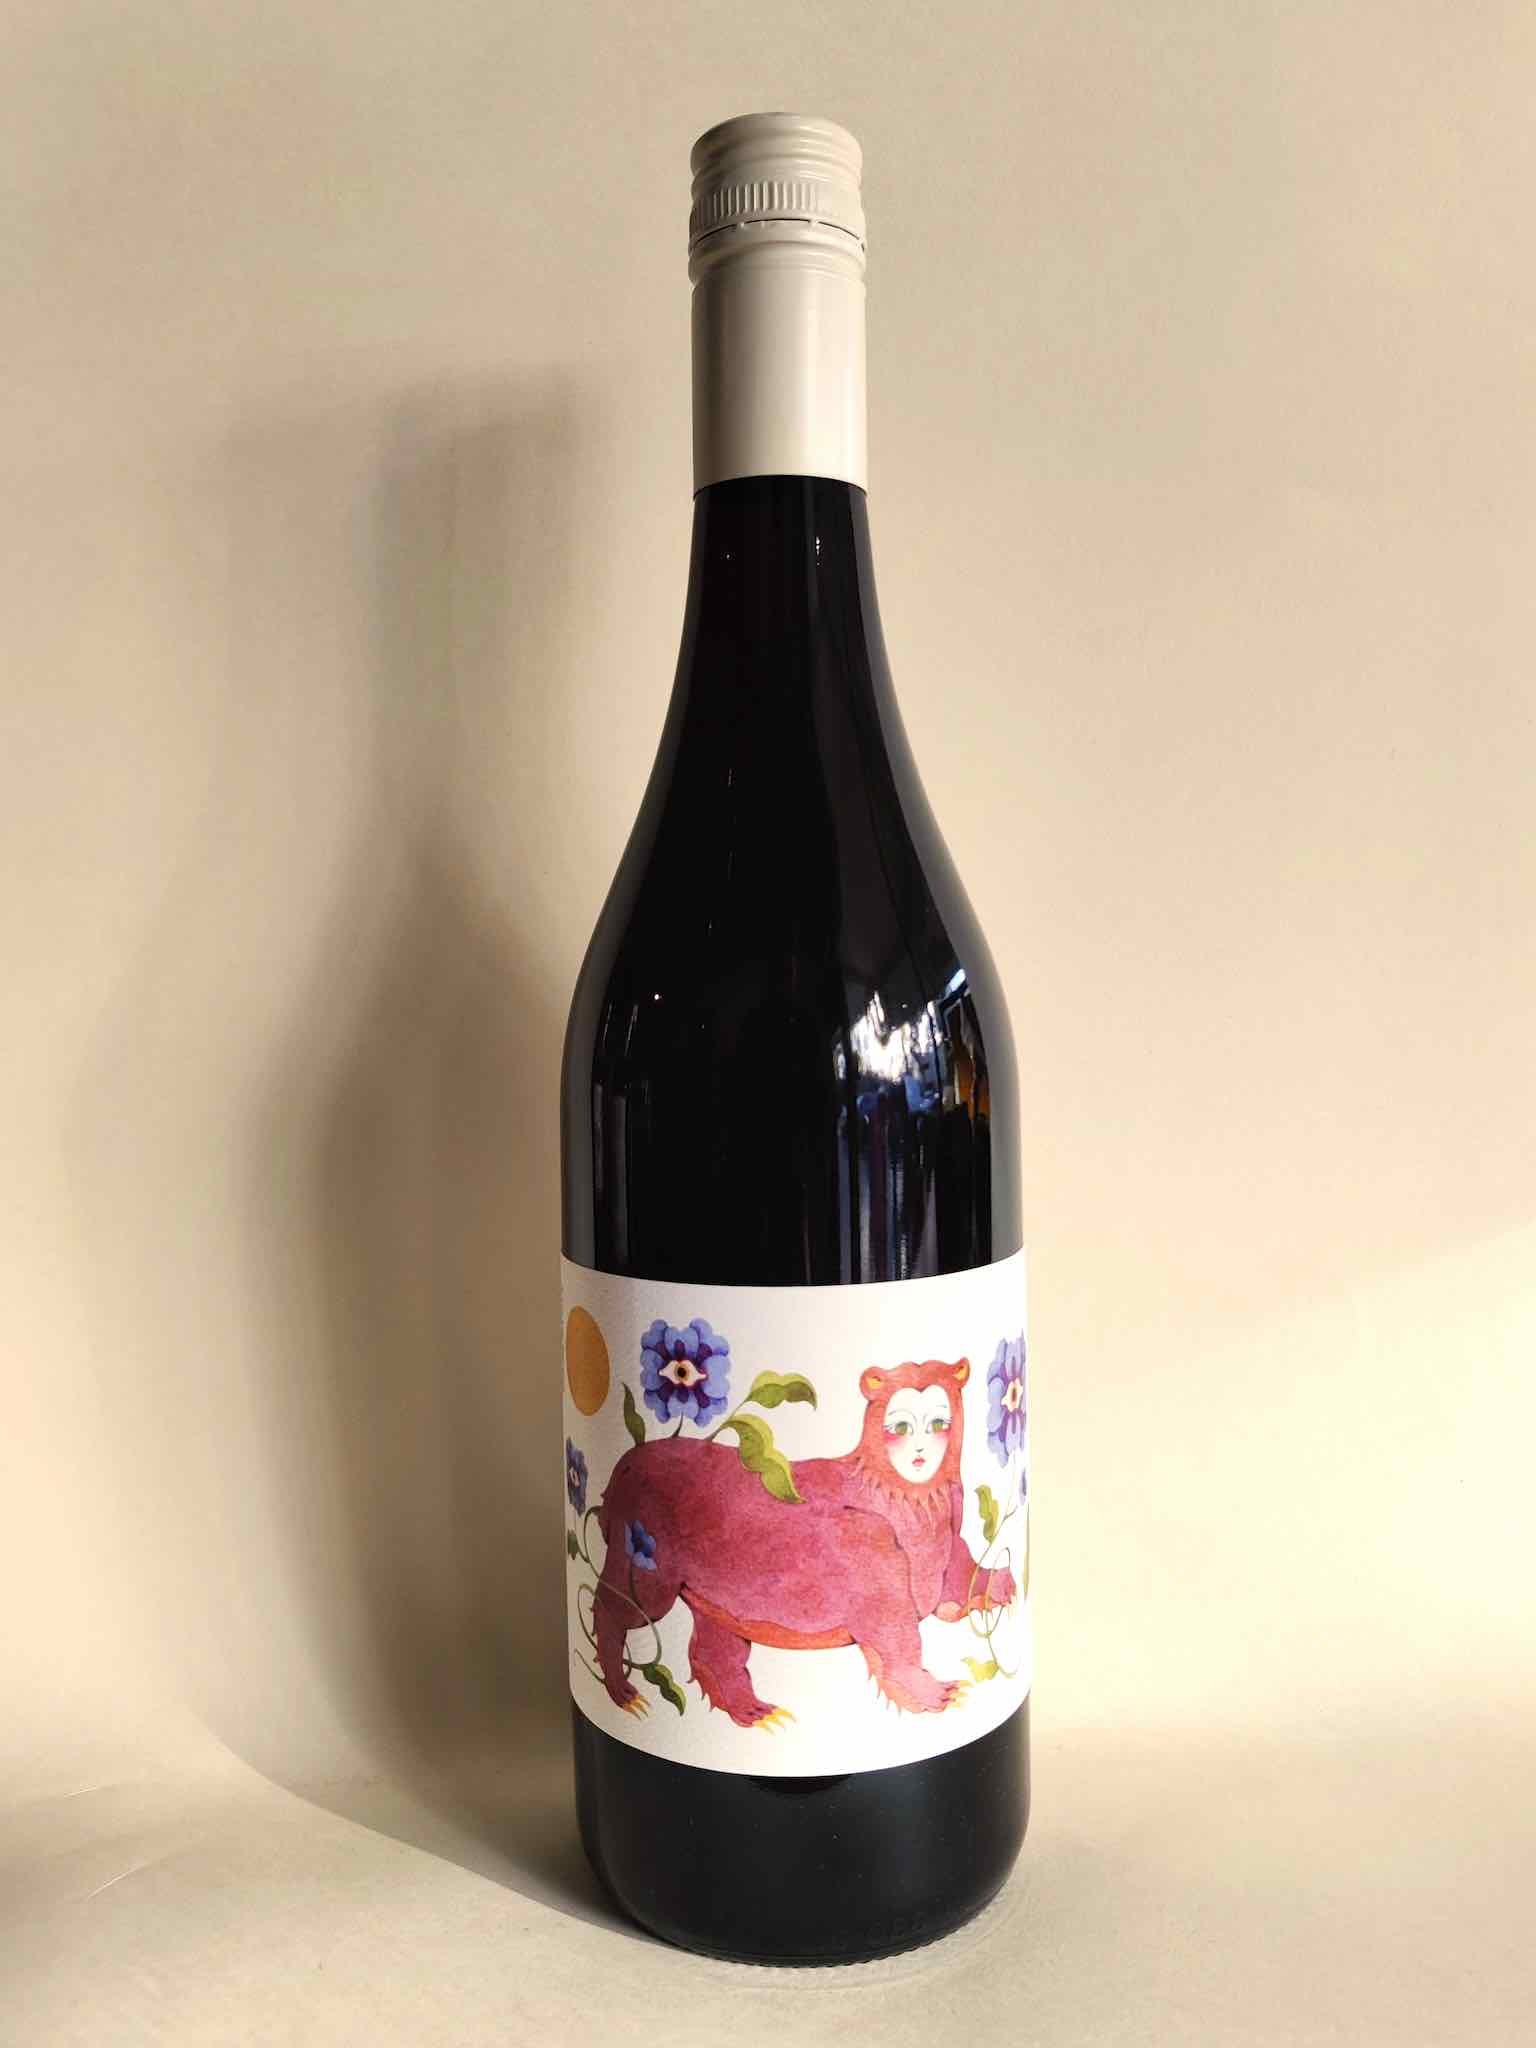 A bottle of Little Frances "11th House" Cabernets red blend from King Valley, Victoria.